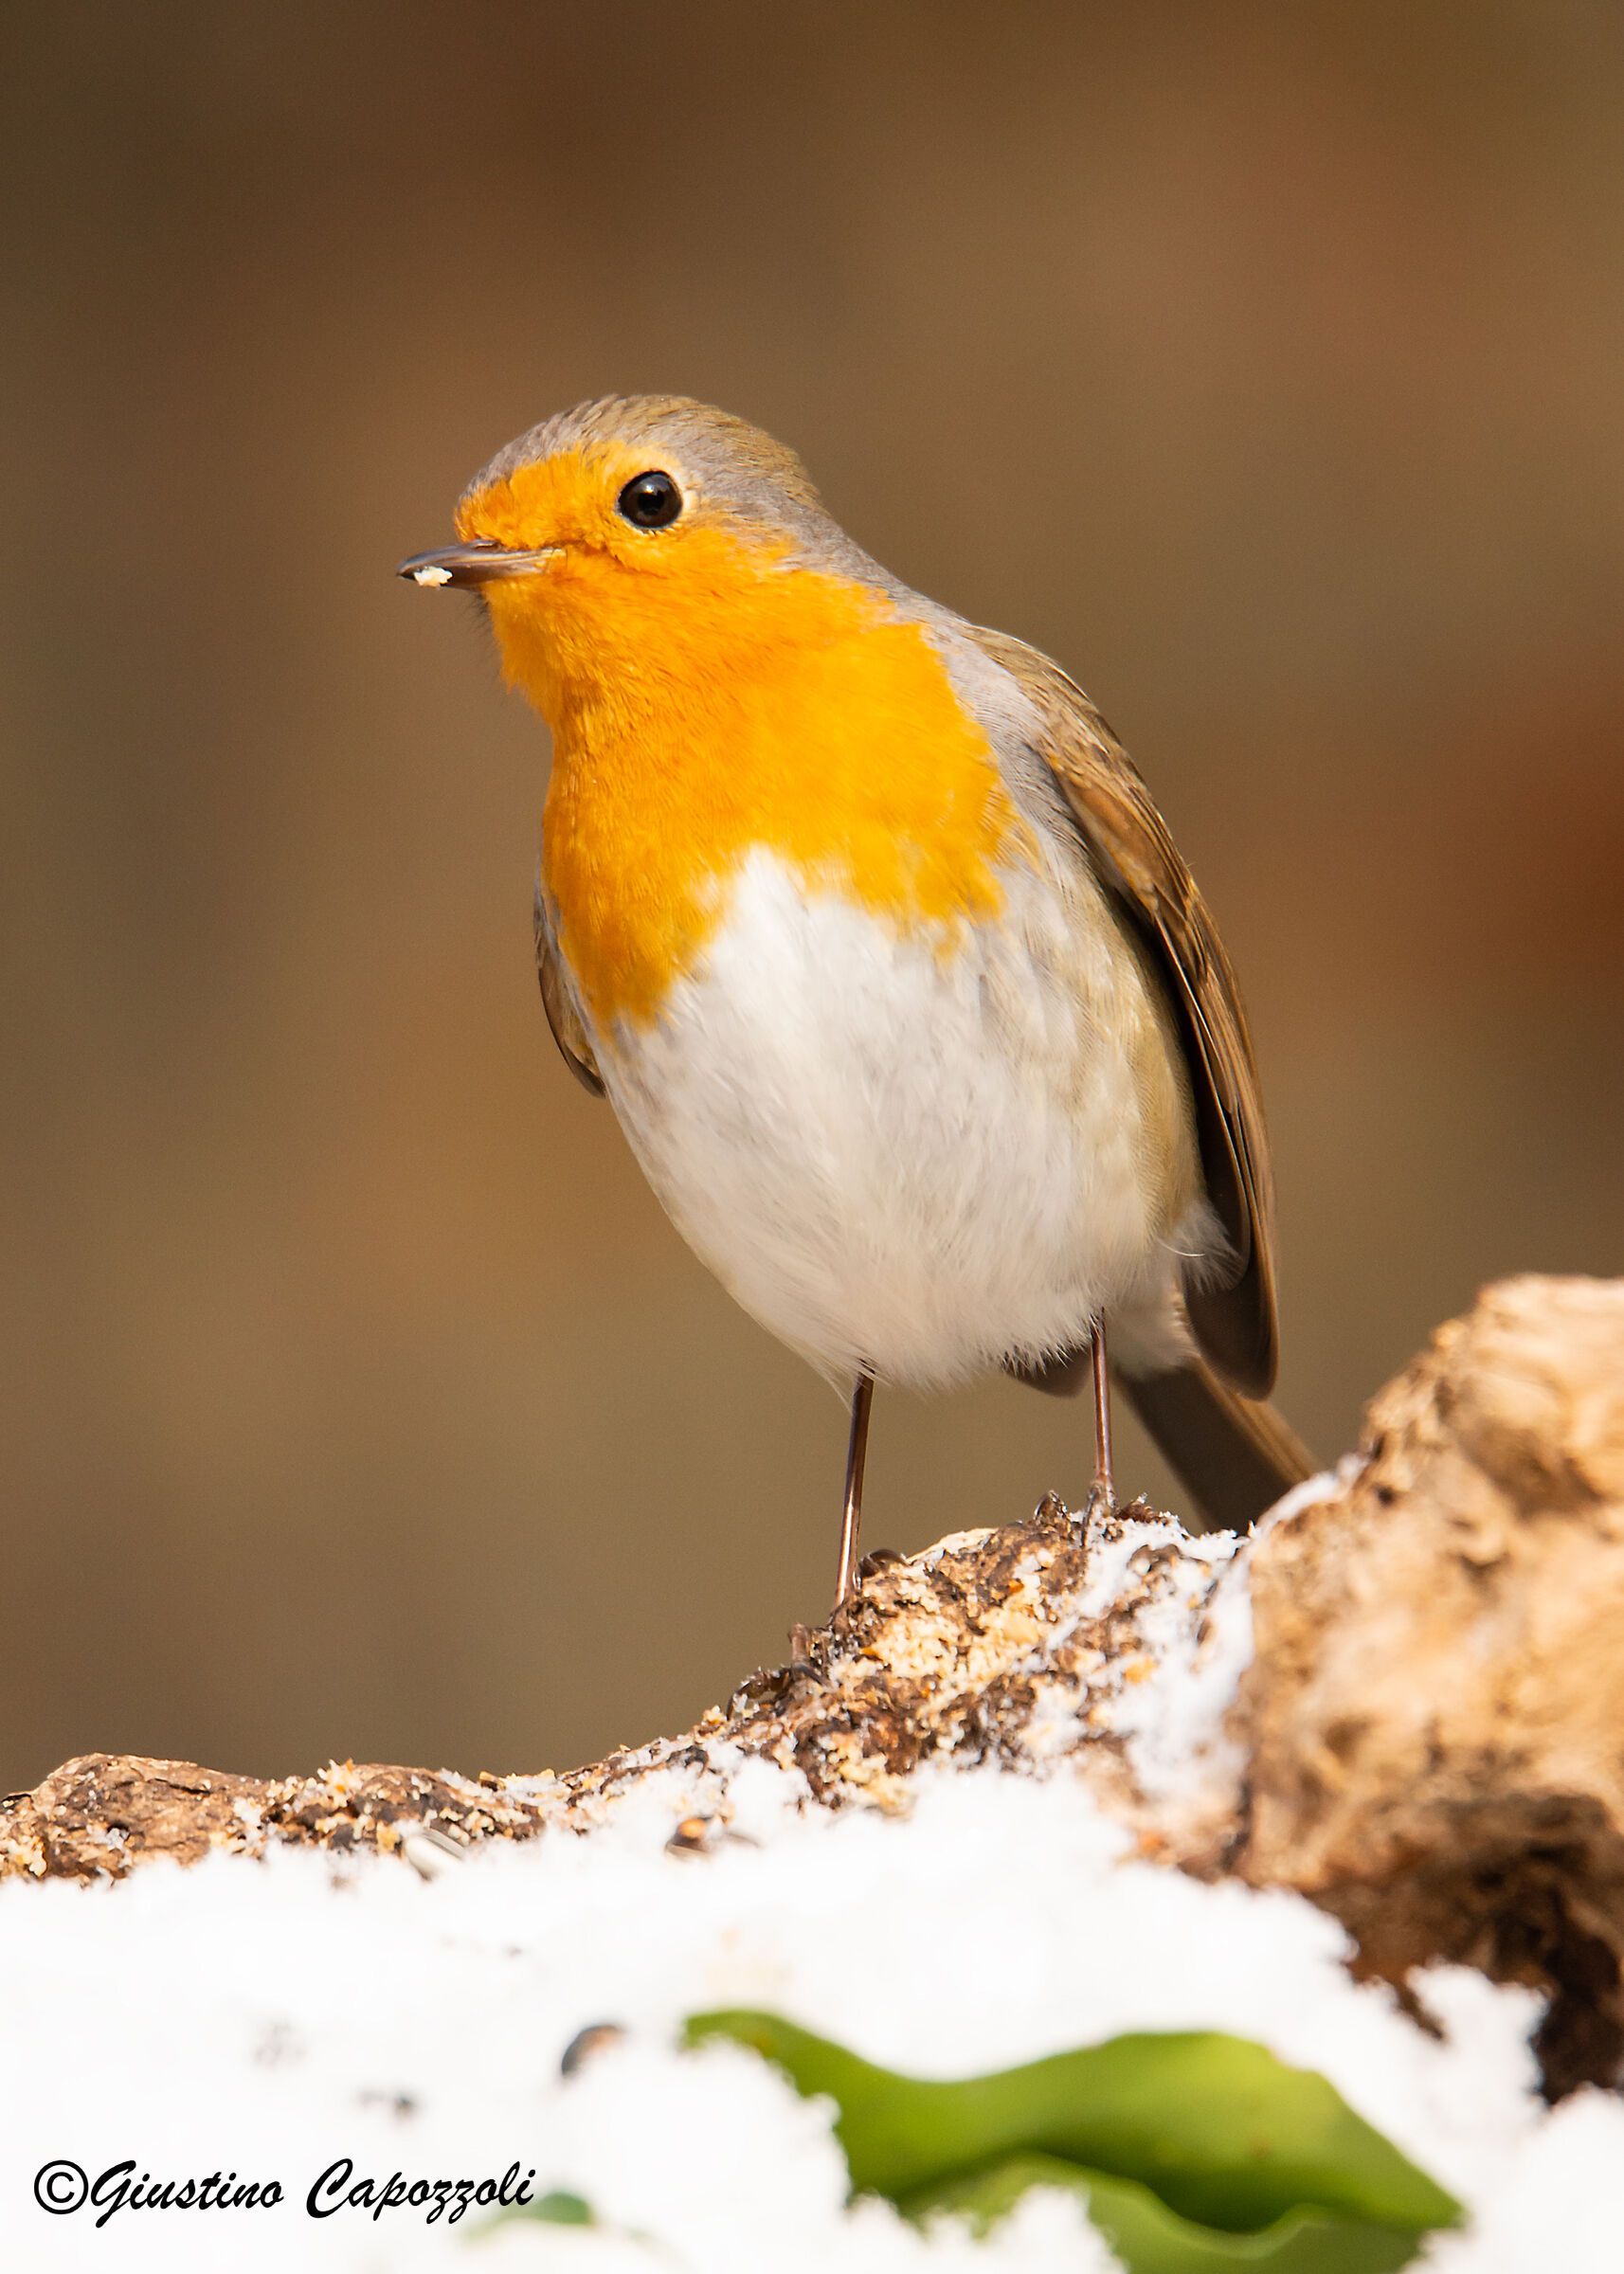 The Robin and the snow...